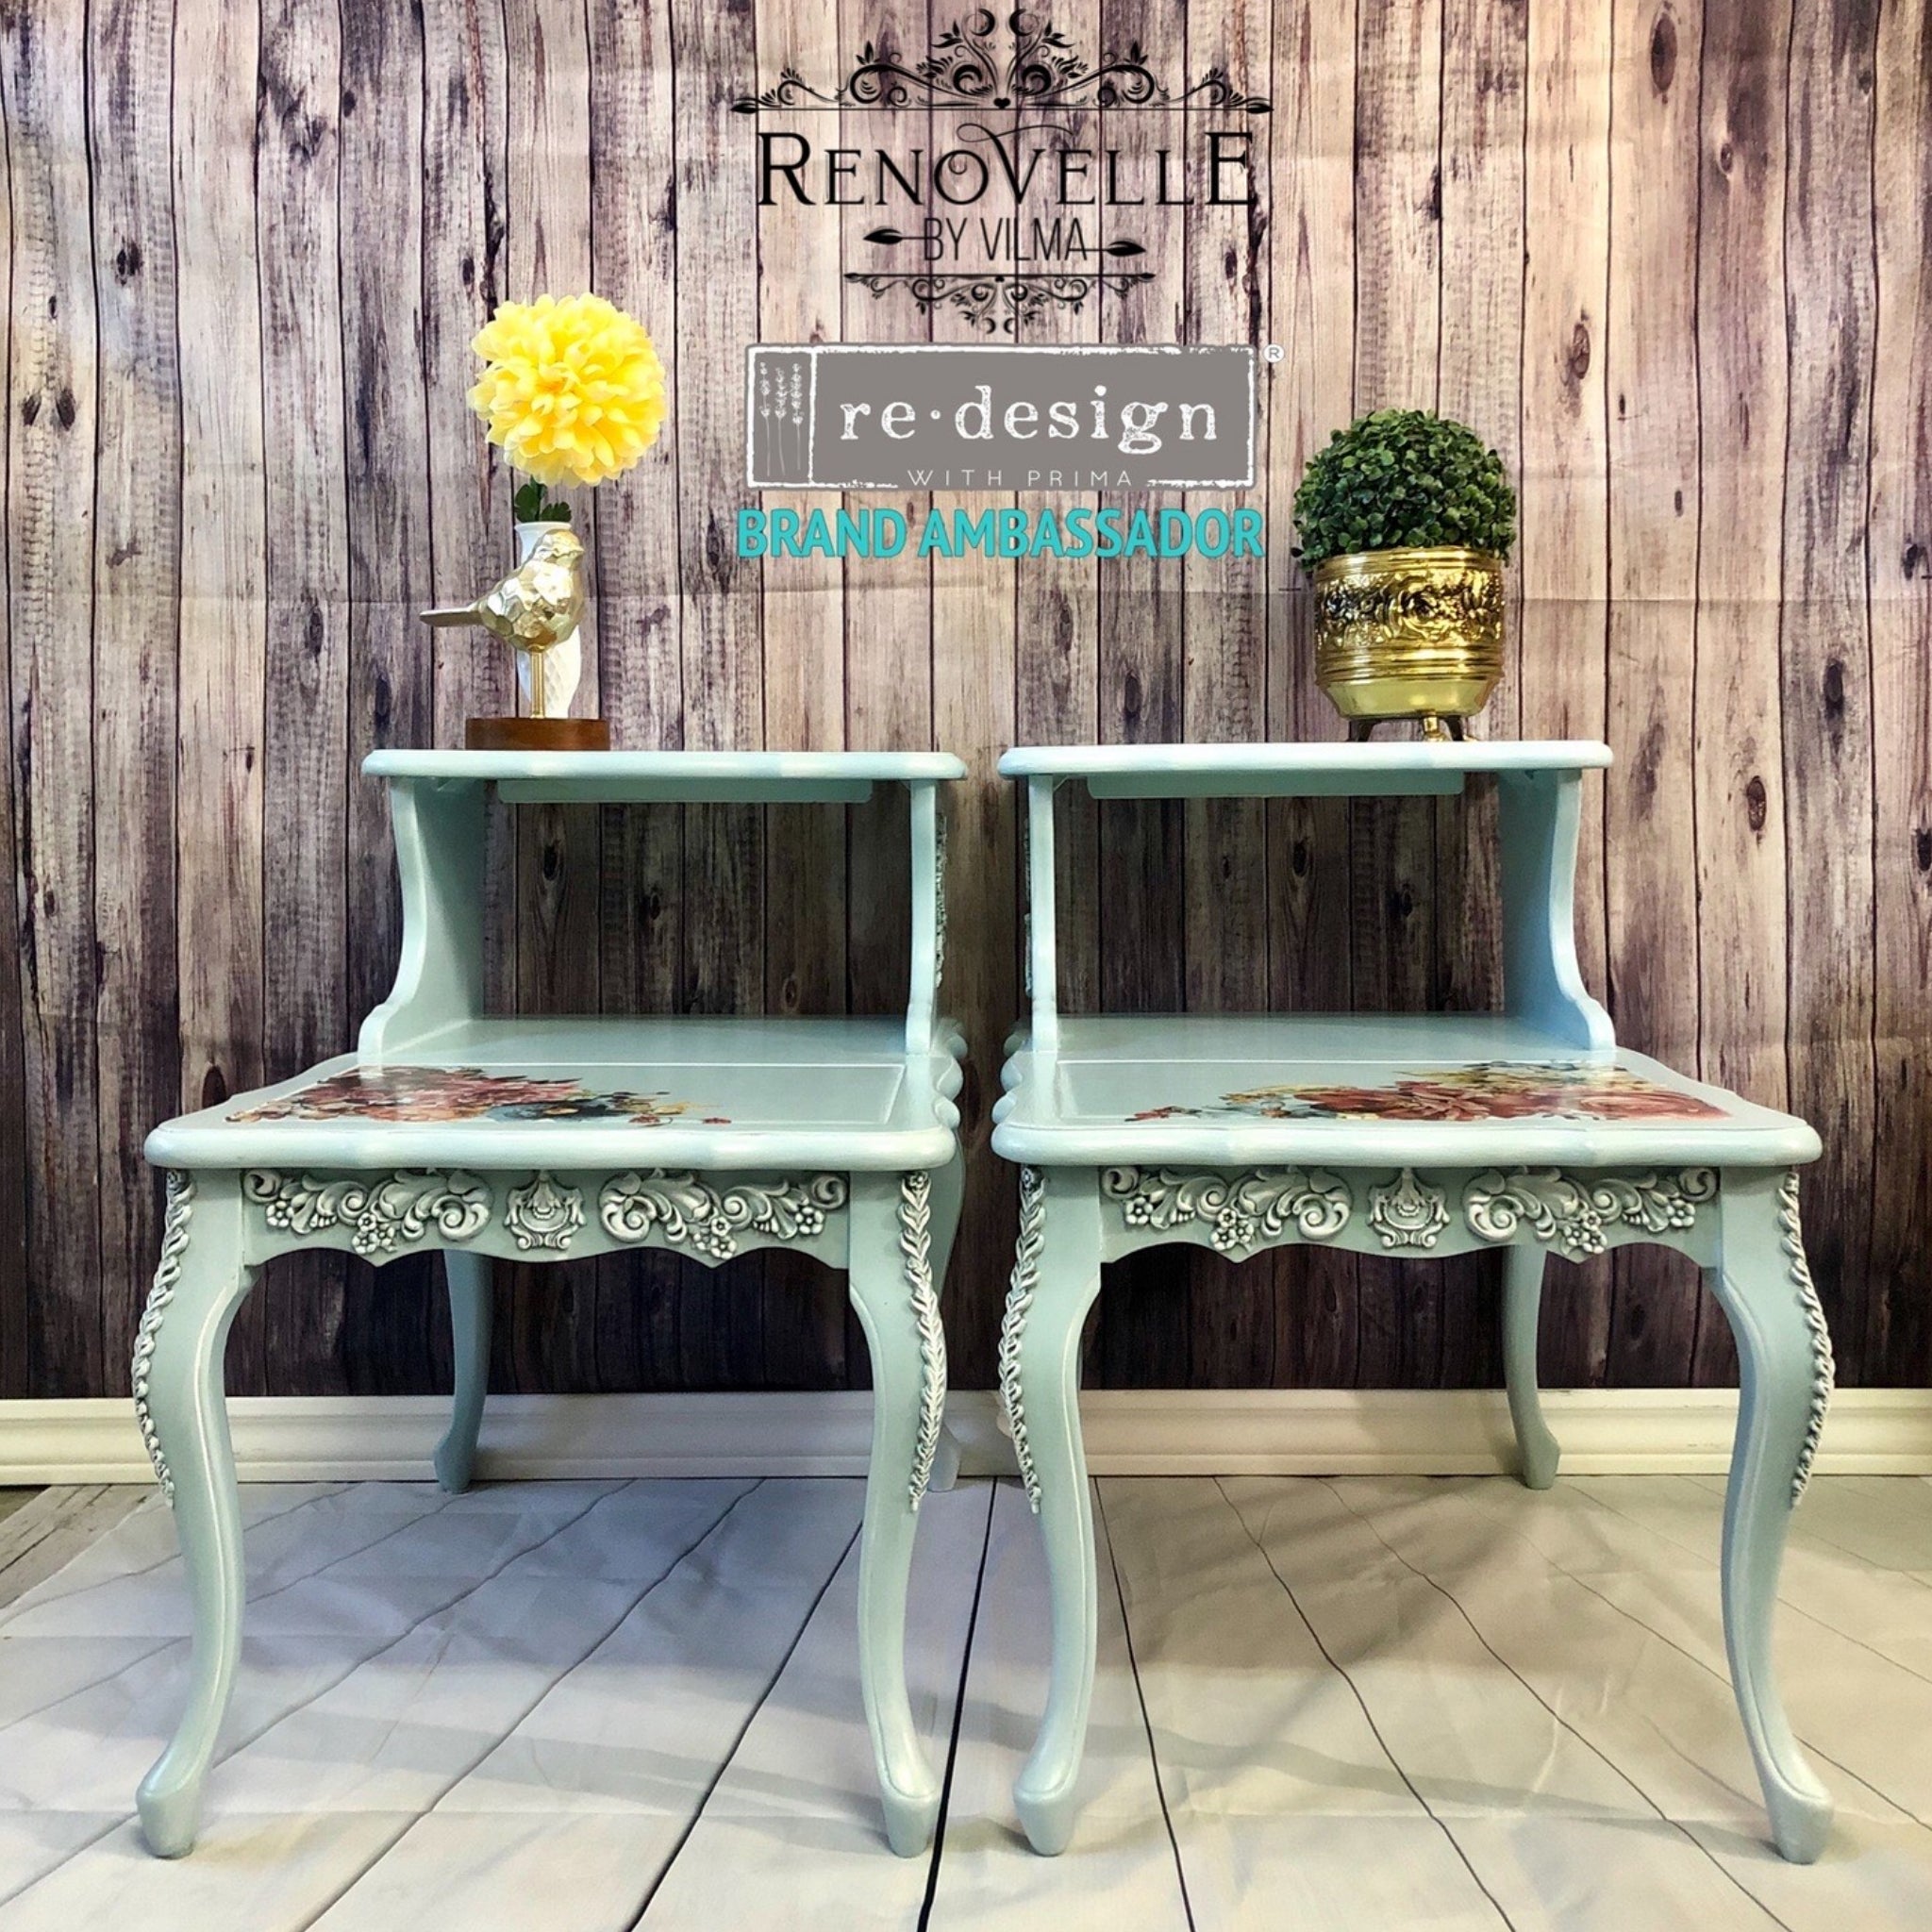 Two vintage long end tables refurbished by Renovelle by Vilma are painted mint green and feature the Groeneville silicone mould castings on them.